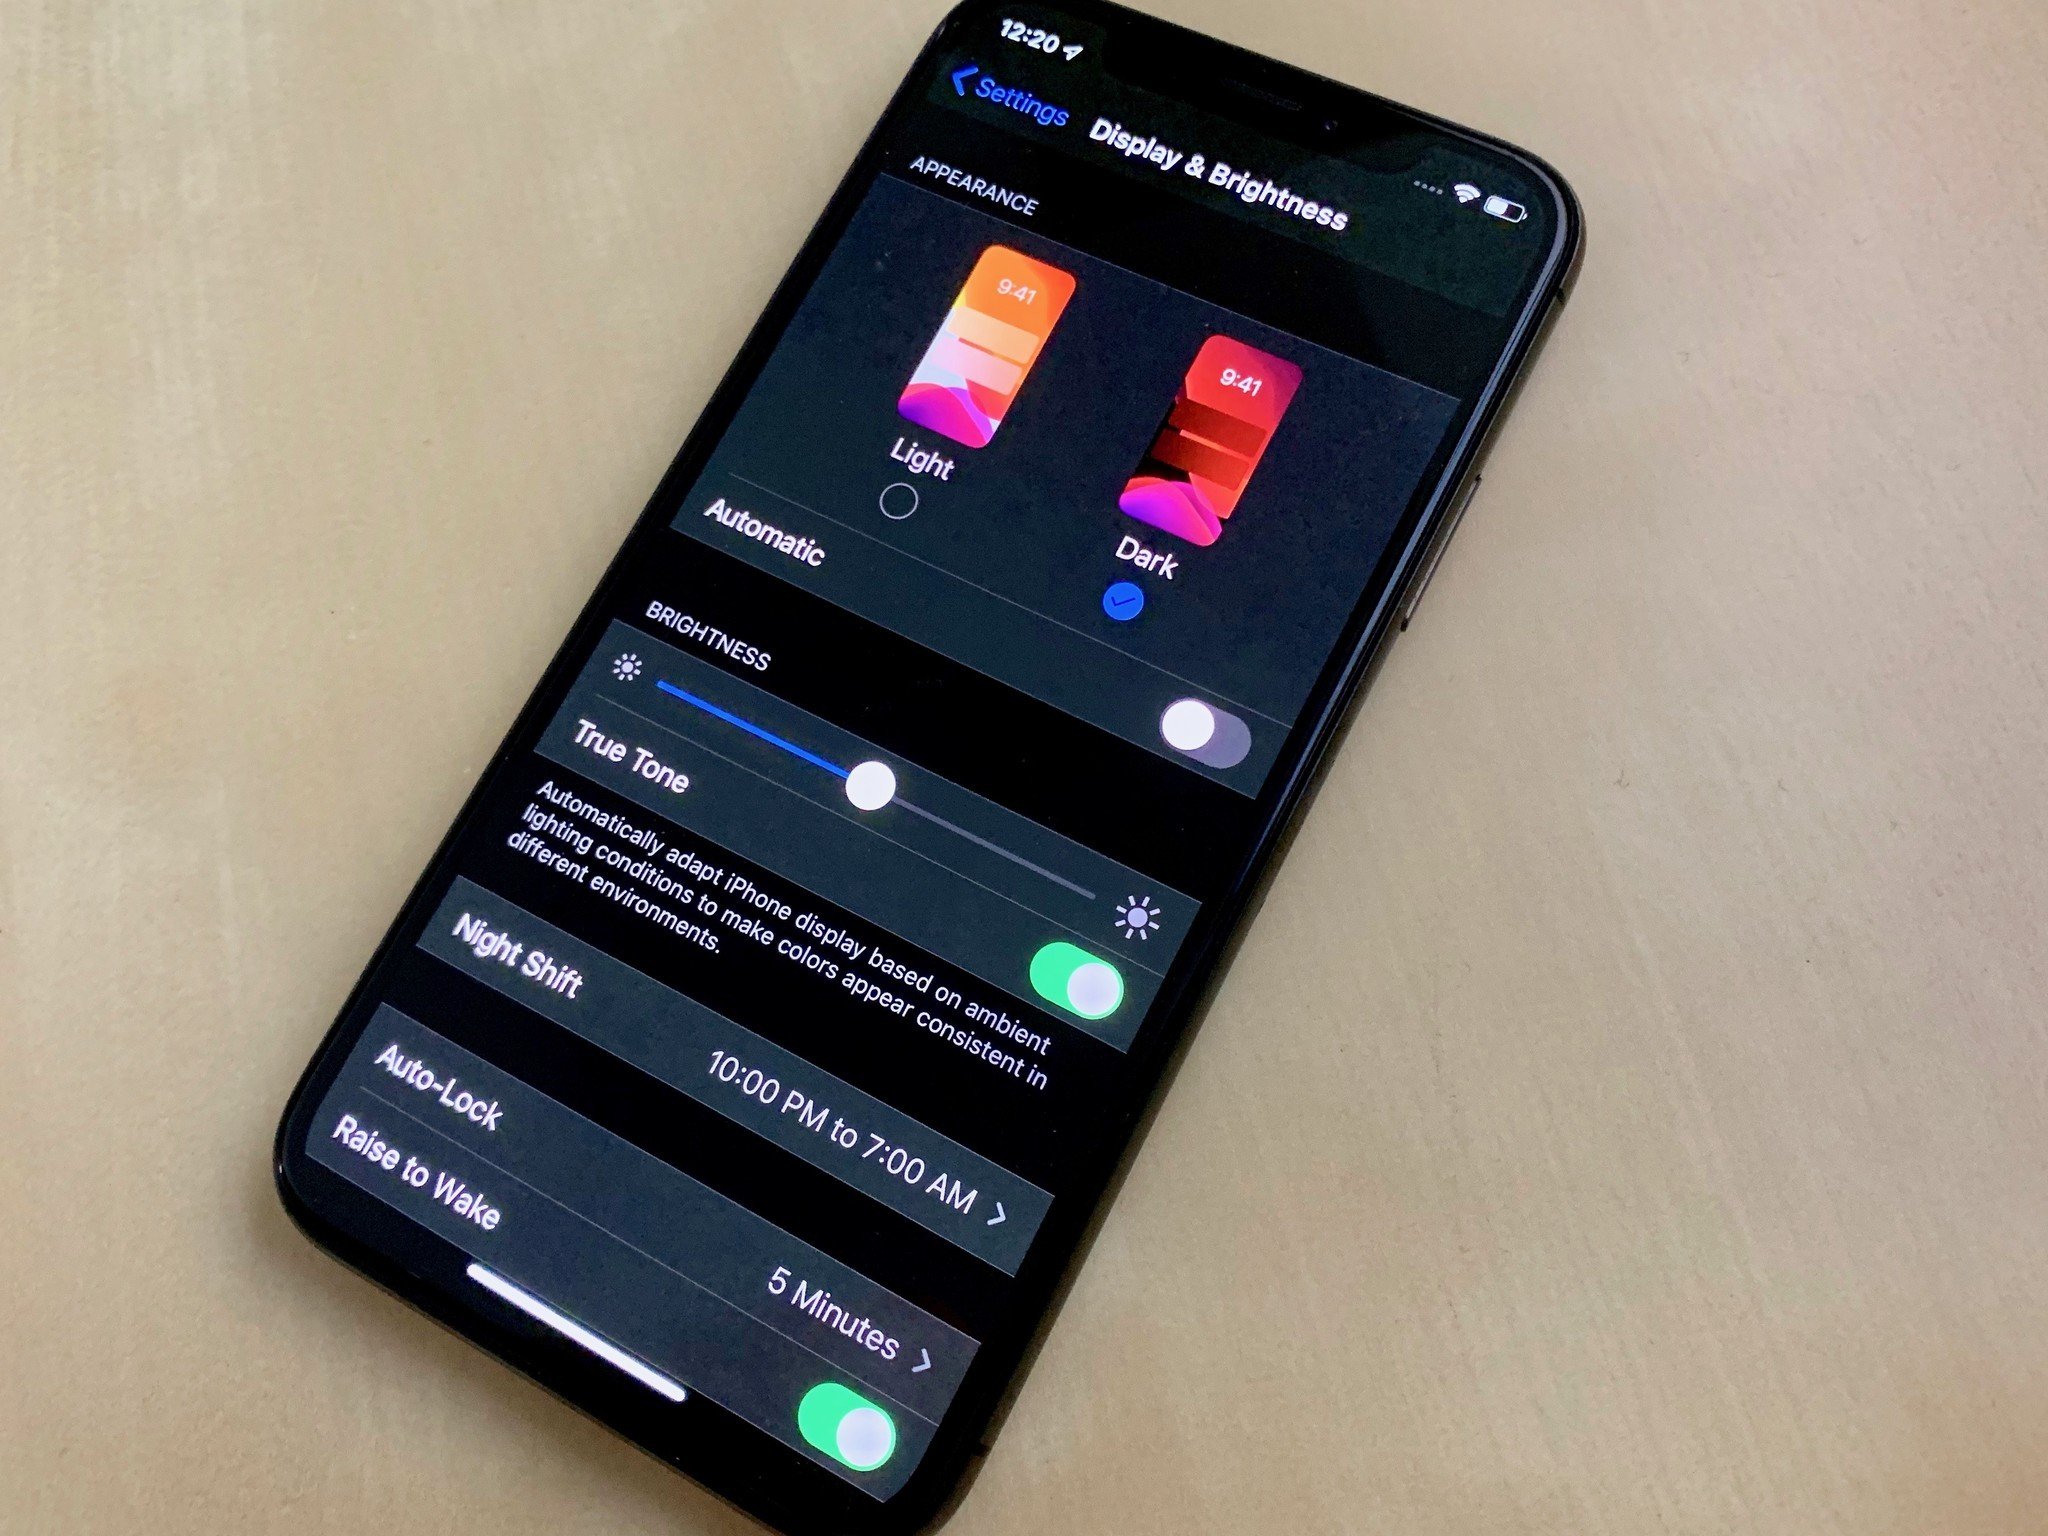 How to use dark mode on iPhone and iPad